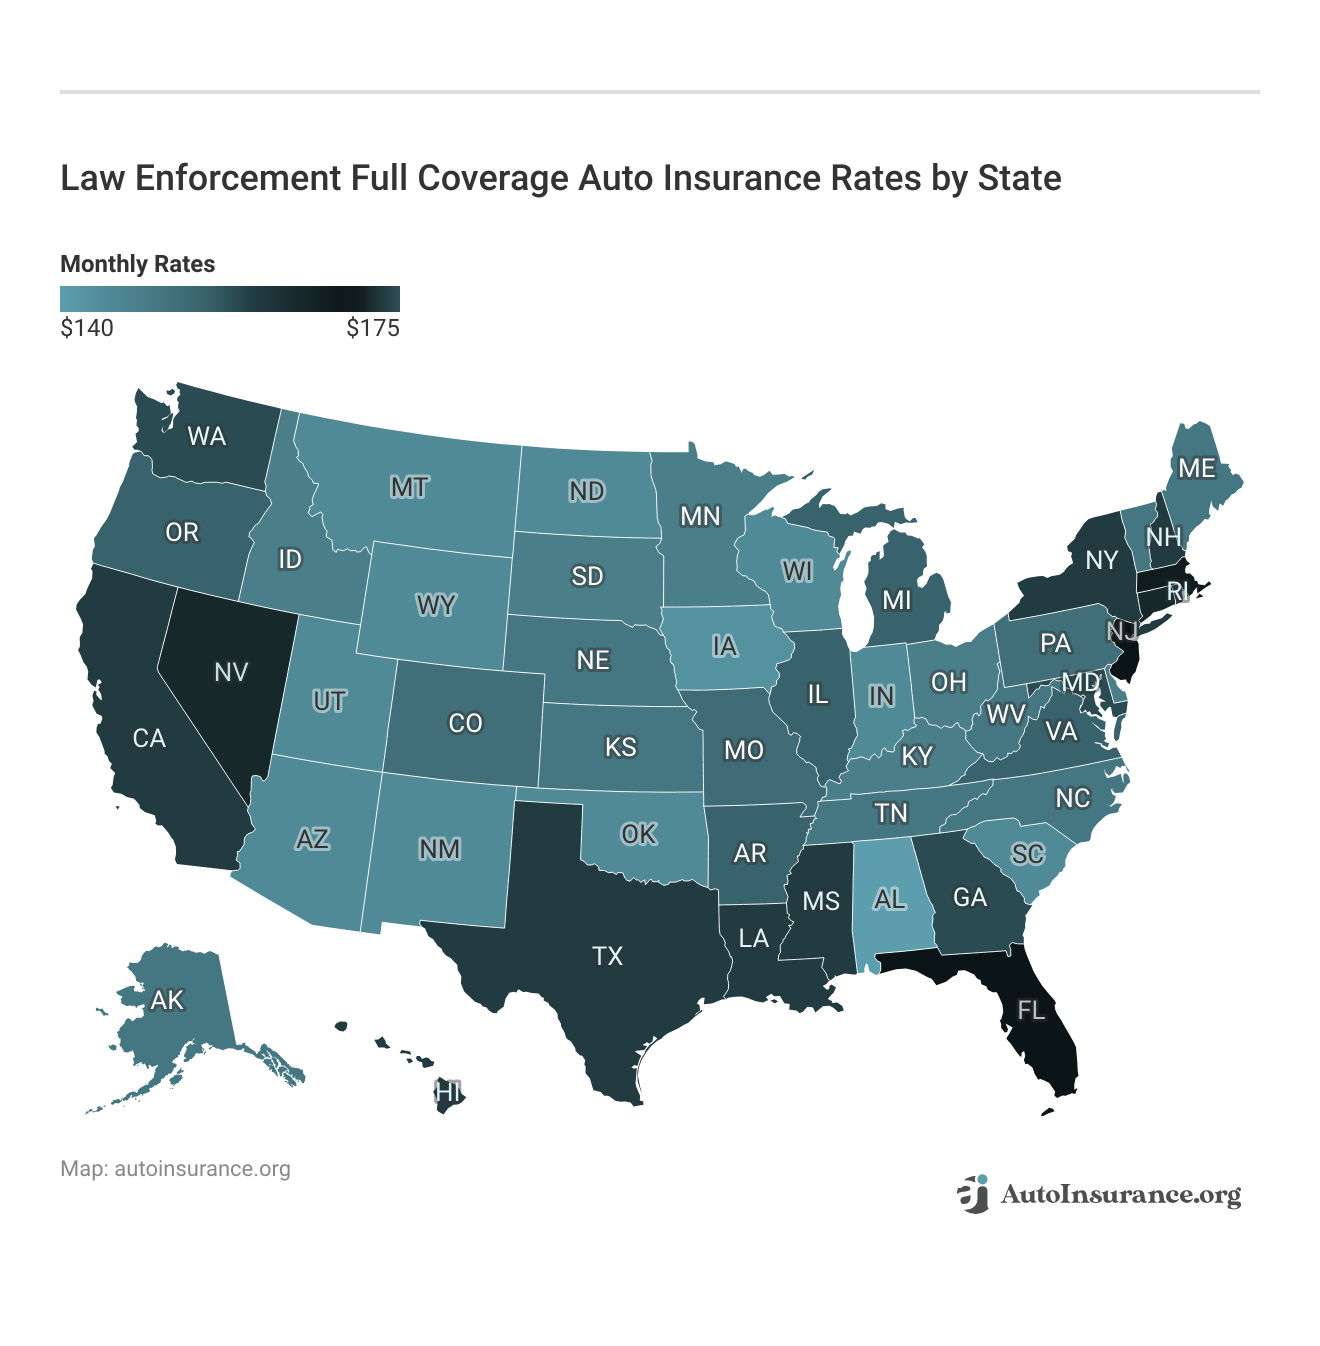 <h3>Law Enforcement Full Coverage Auto Insurance Rates by State</h3>